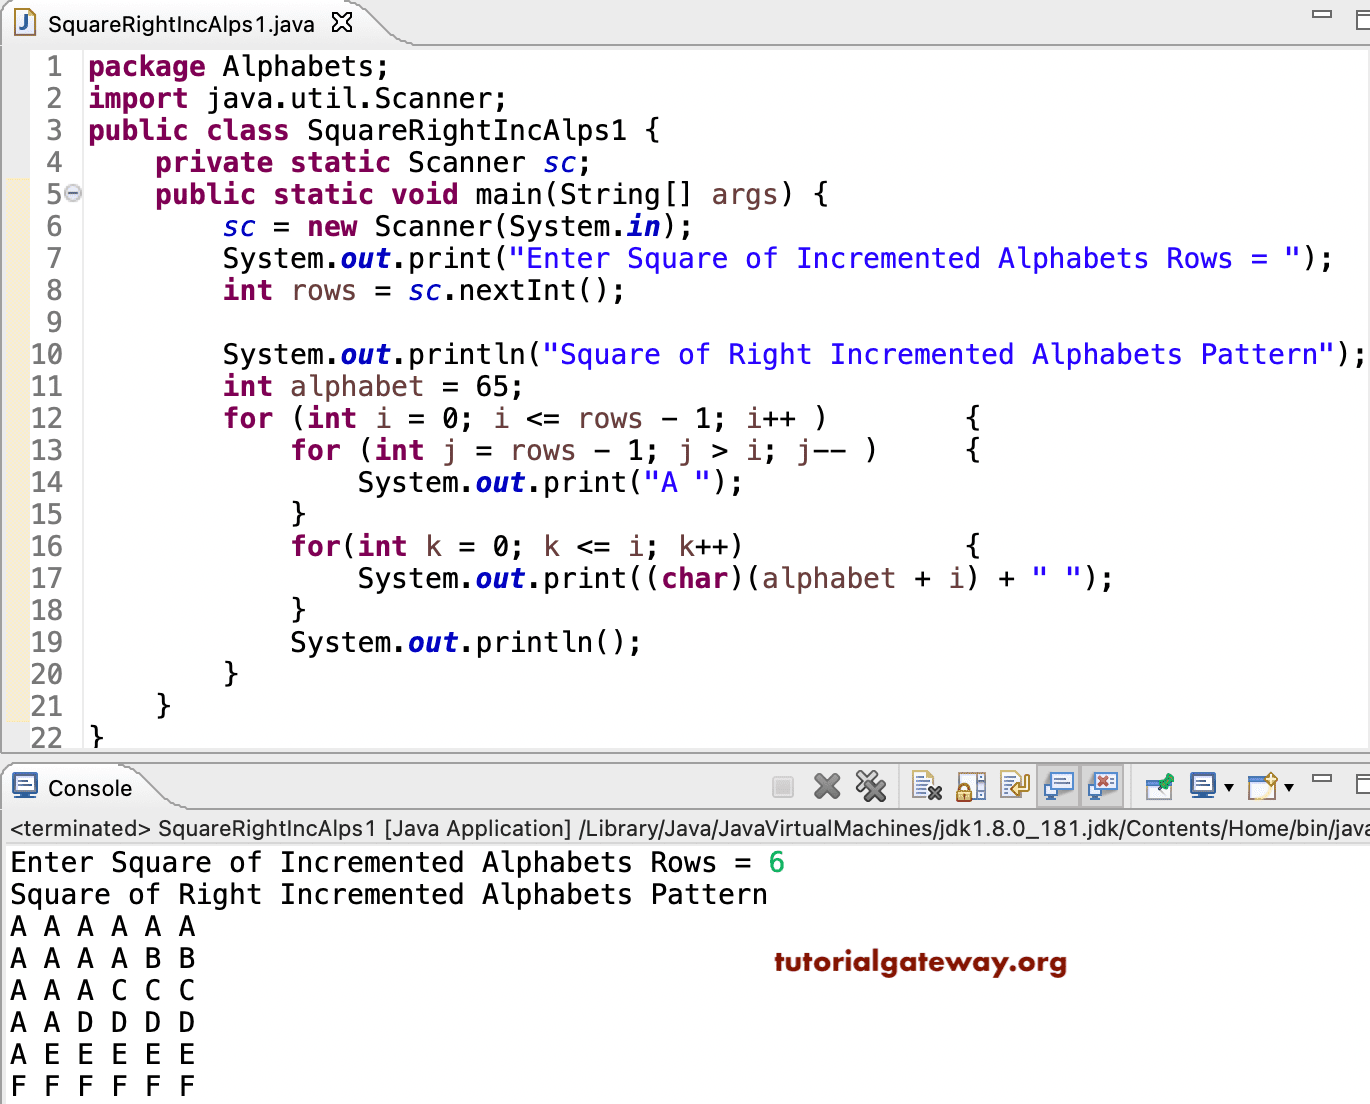 Java Program to Print Square of Right Increment Alphabets Pattern